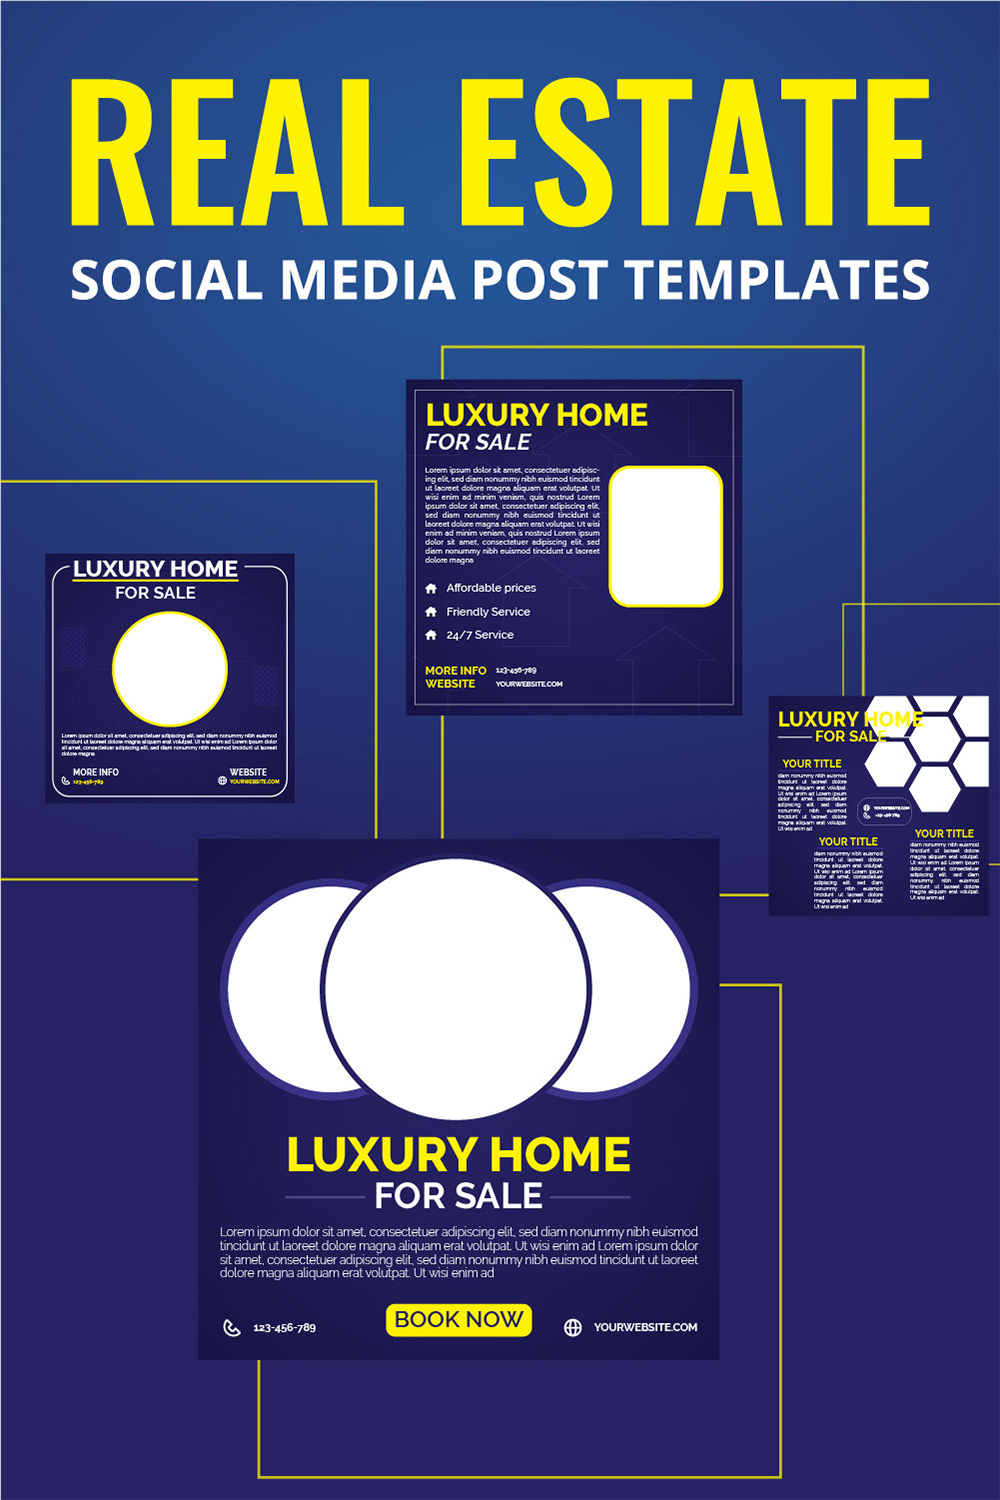 Real estate social media post templates pinterest preview image.